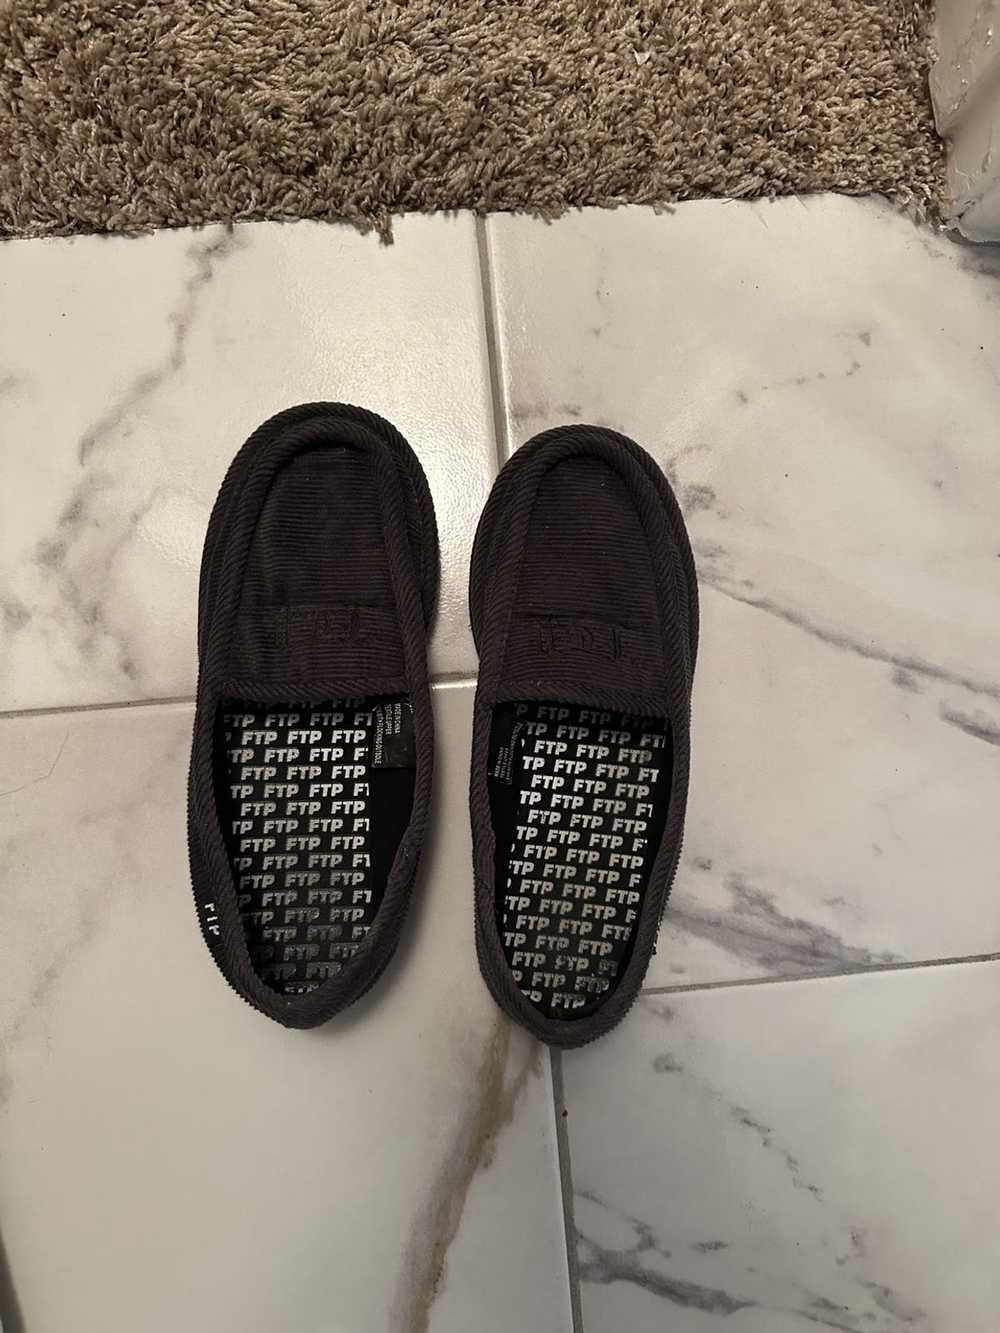 Fuck The Population Ftp house slippers - image 2